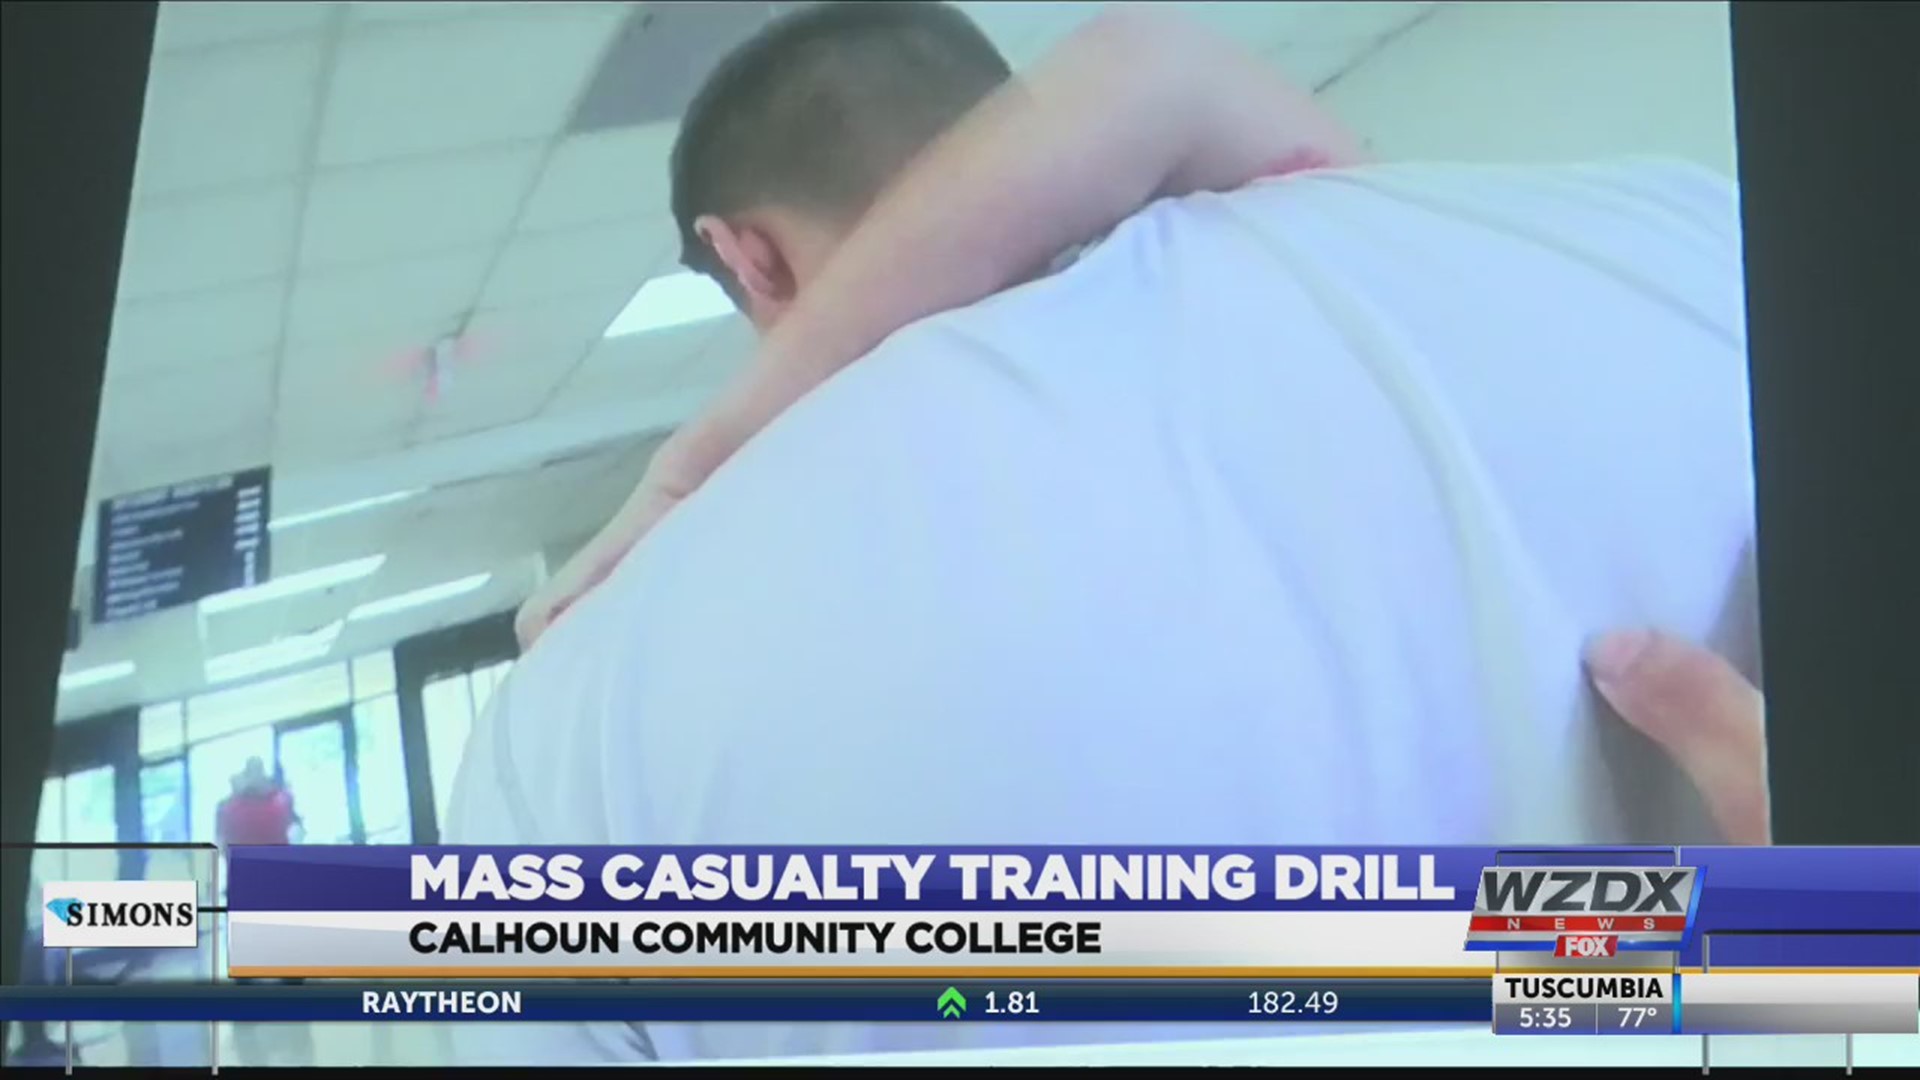 Students learn in mass casualty training drill at Calhoun Community College.